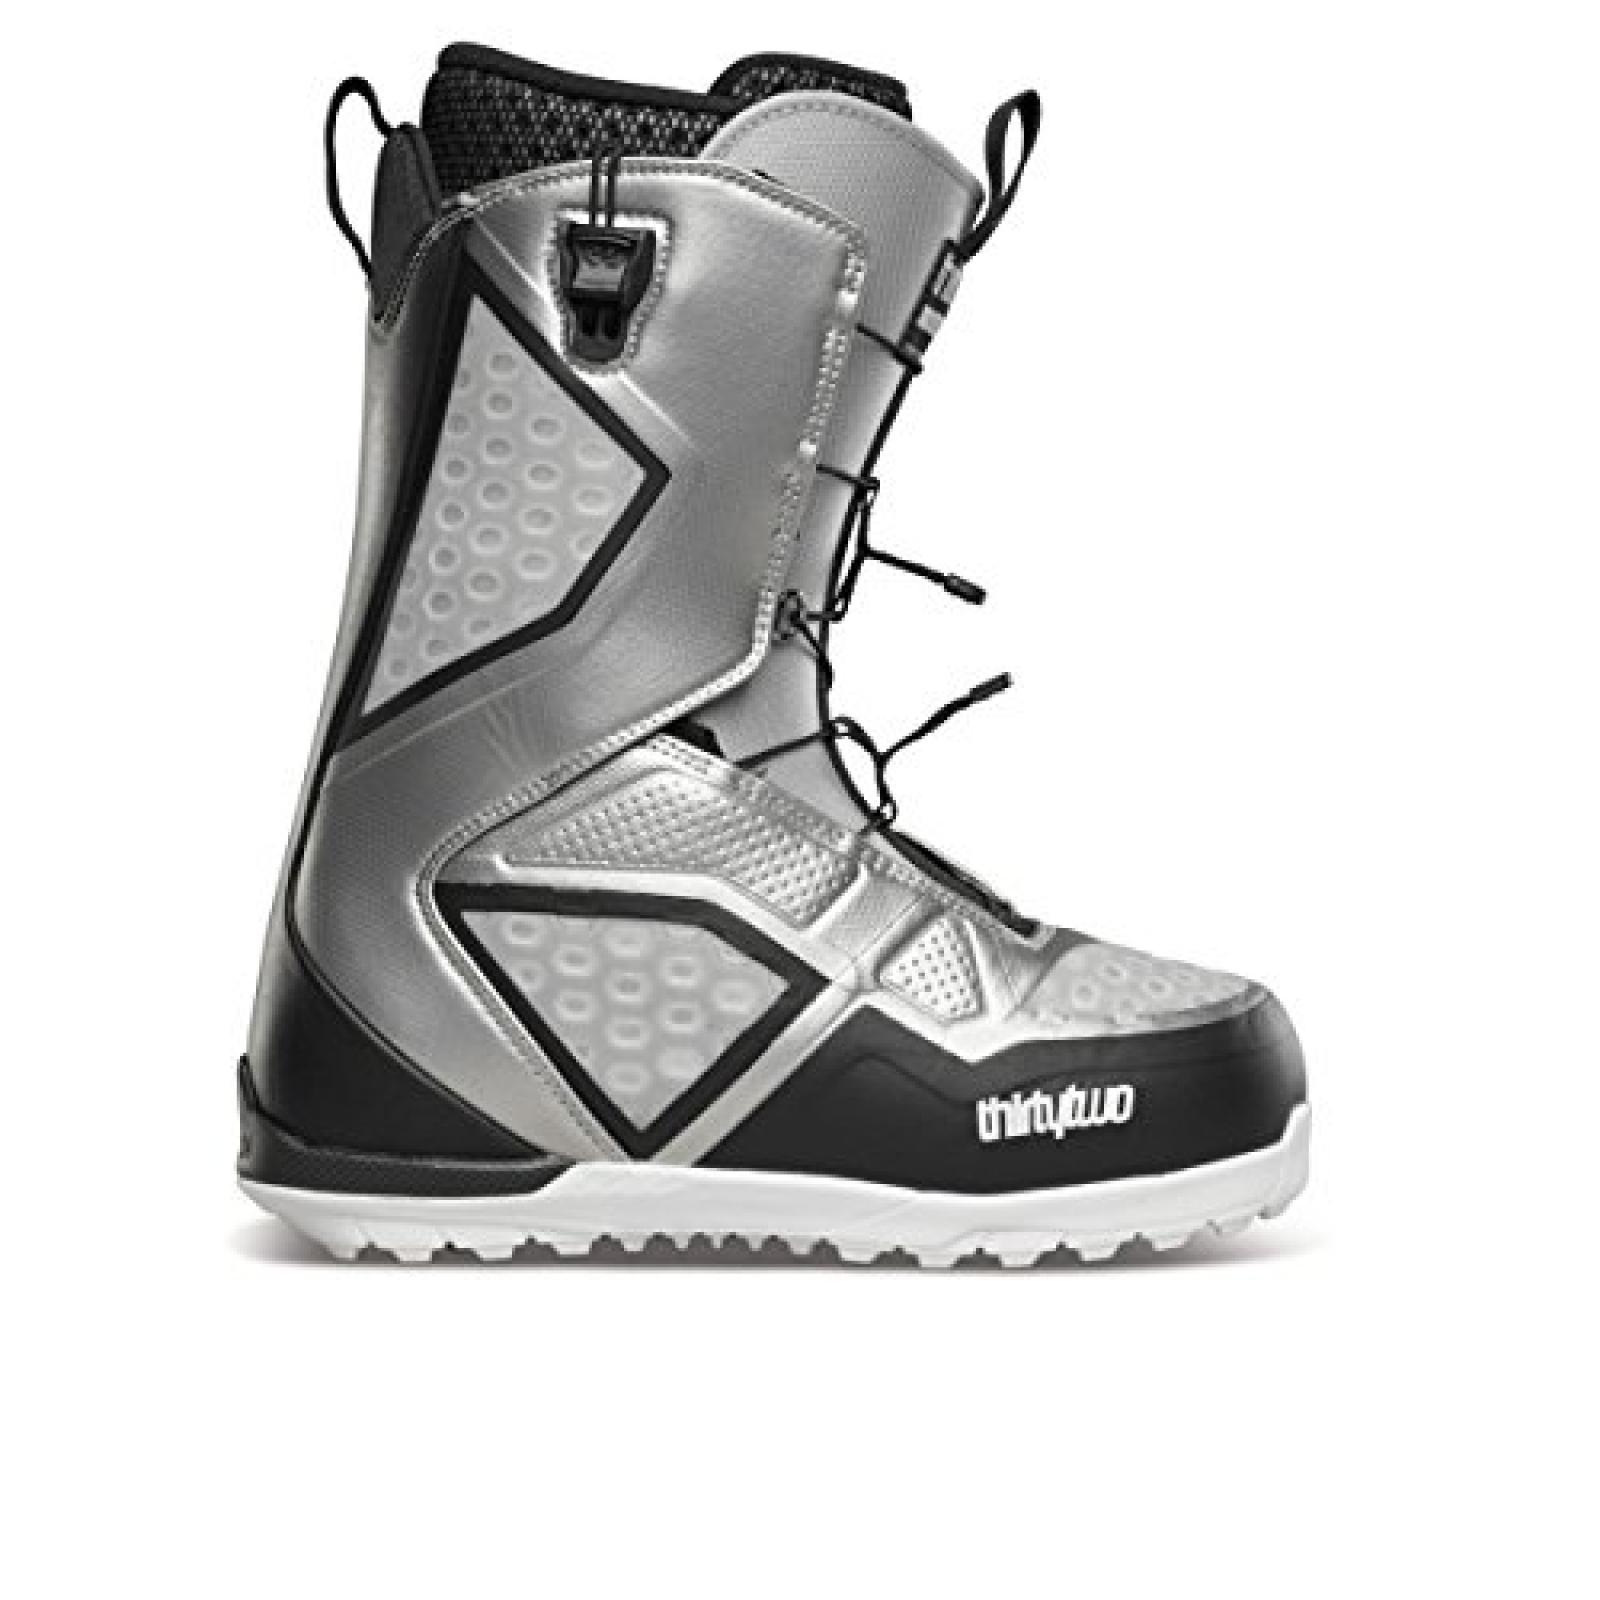 ThirtyTwo Ultralight 2 FT Snowboard Boots - Silver 